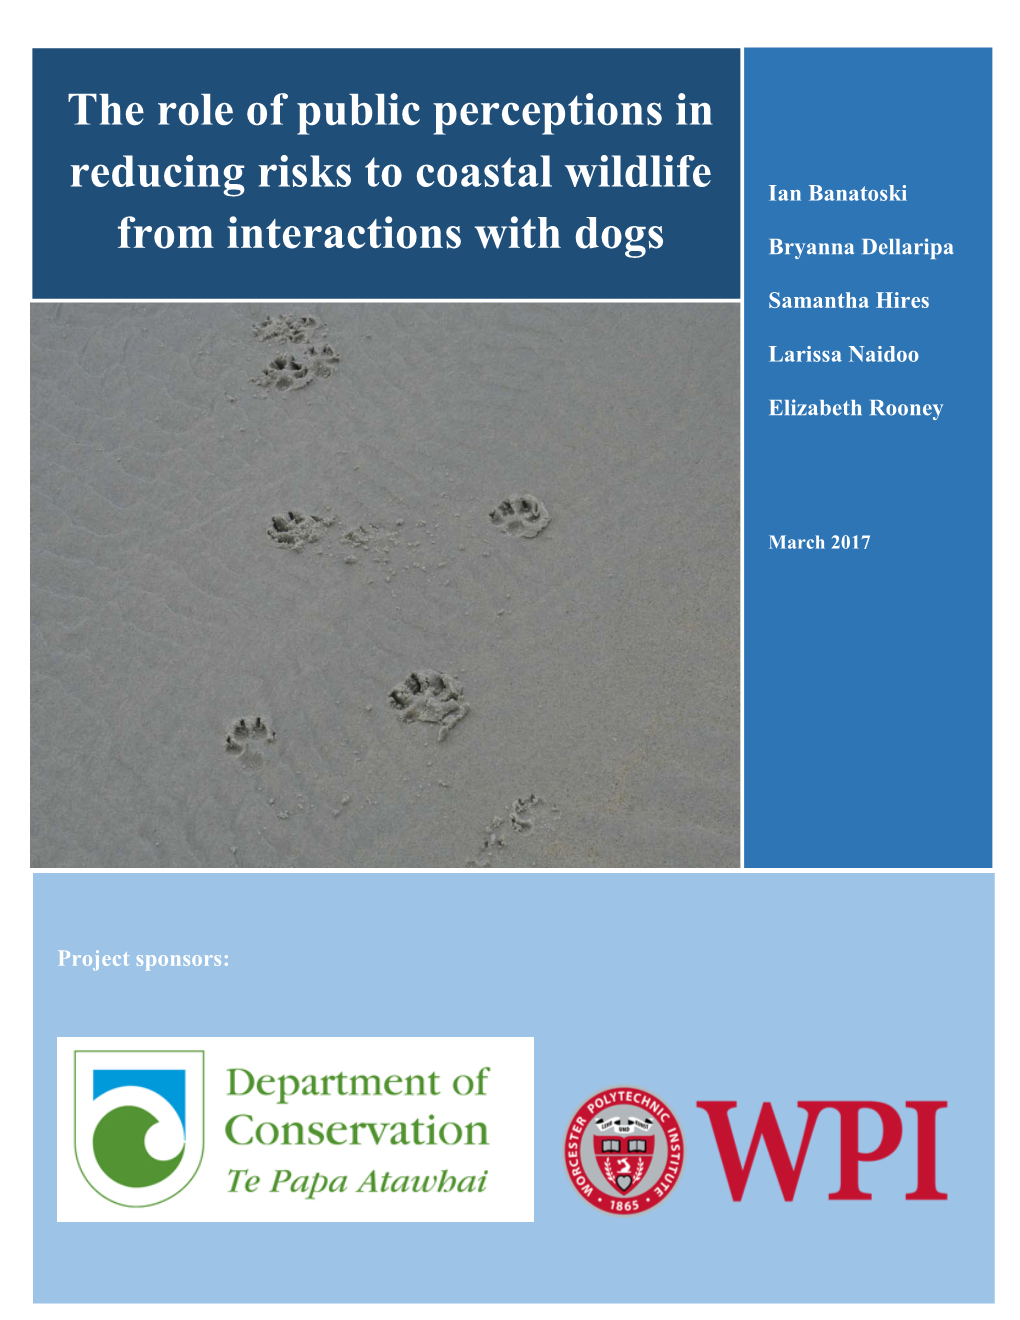 The Role of Public Perceptions in Reducing Risks to Coastal Wildlife from Interactions with Dogs